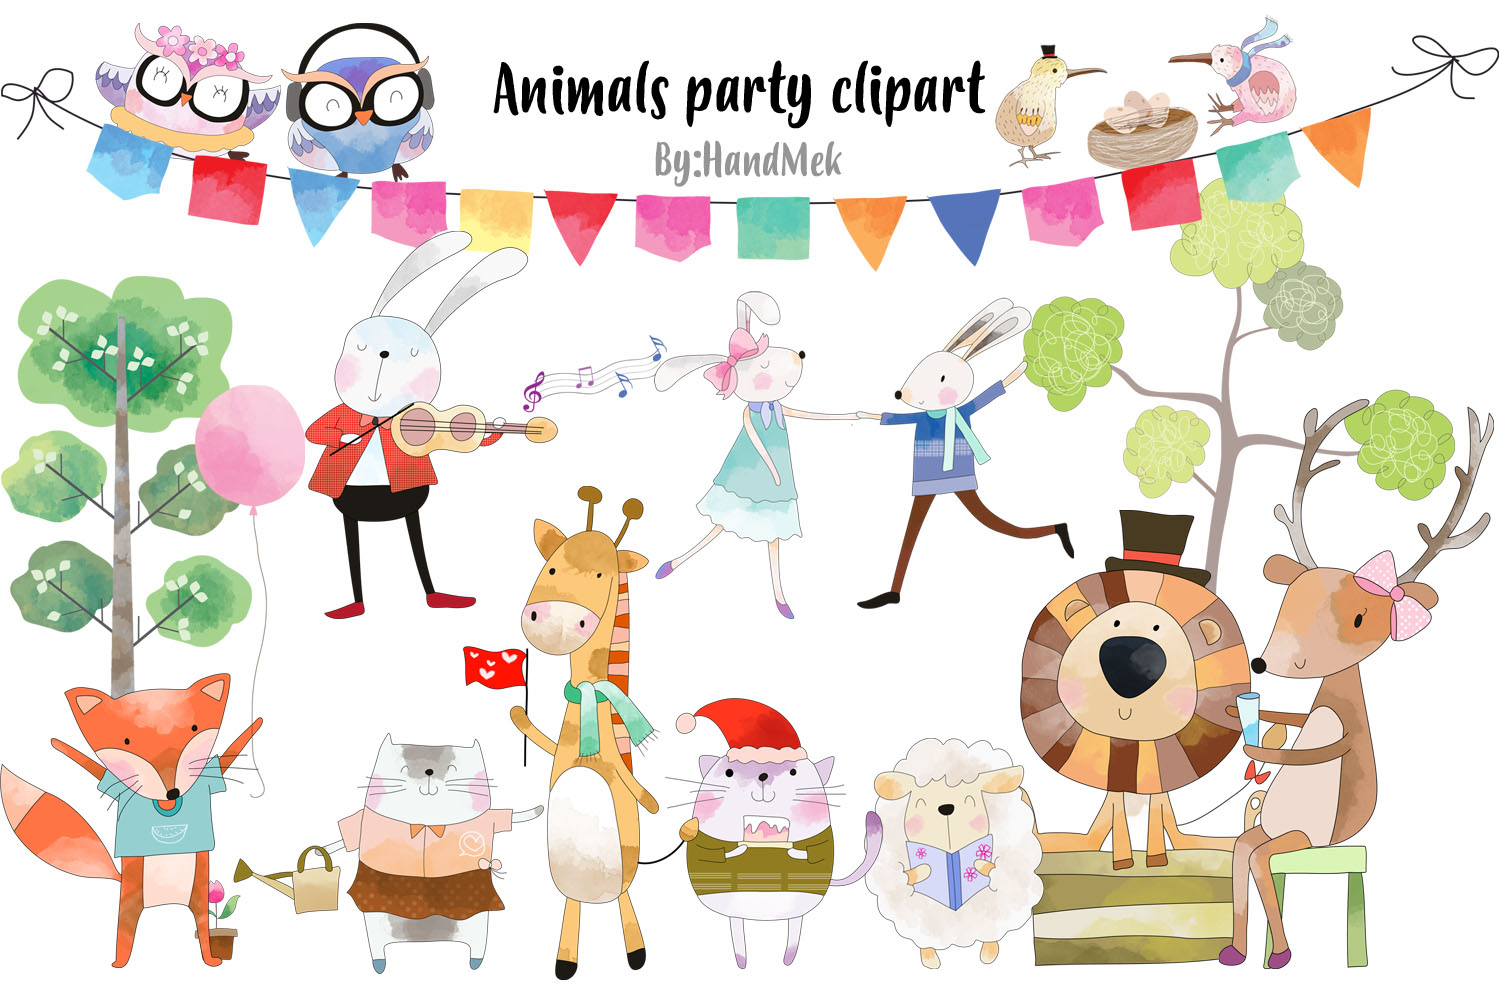 Animals party clipart